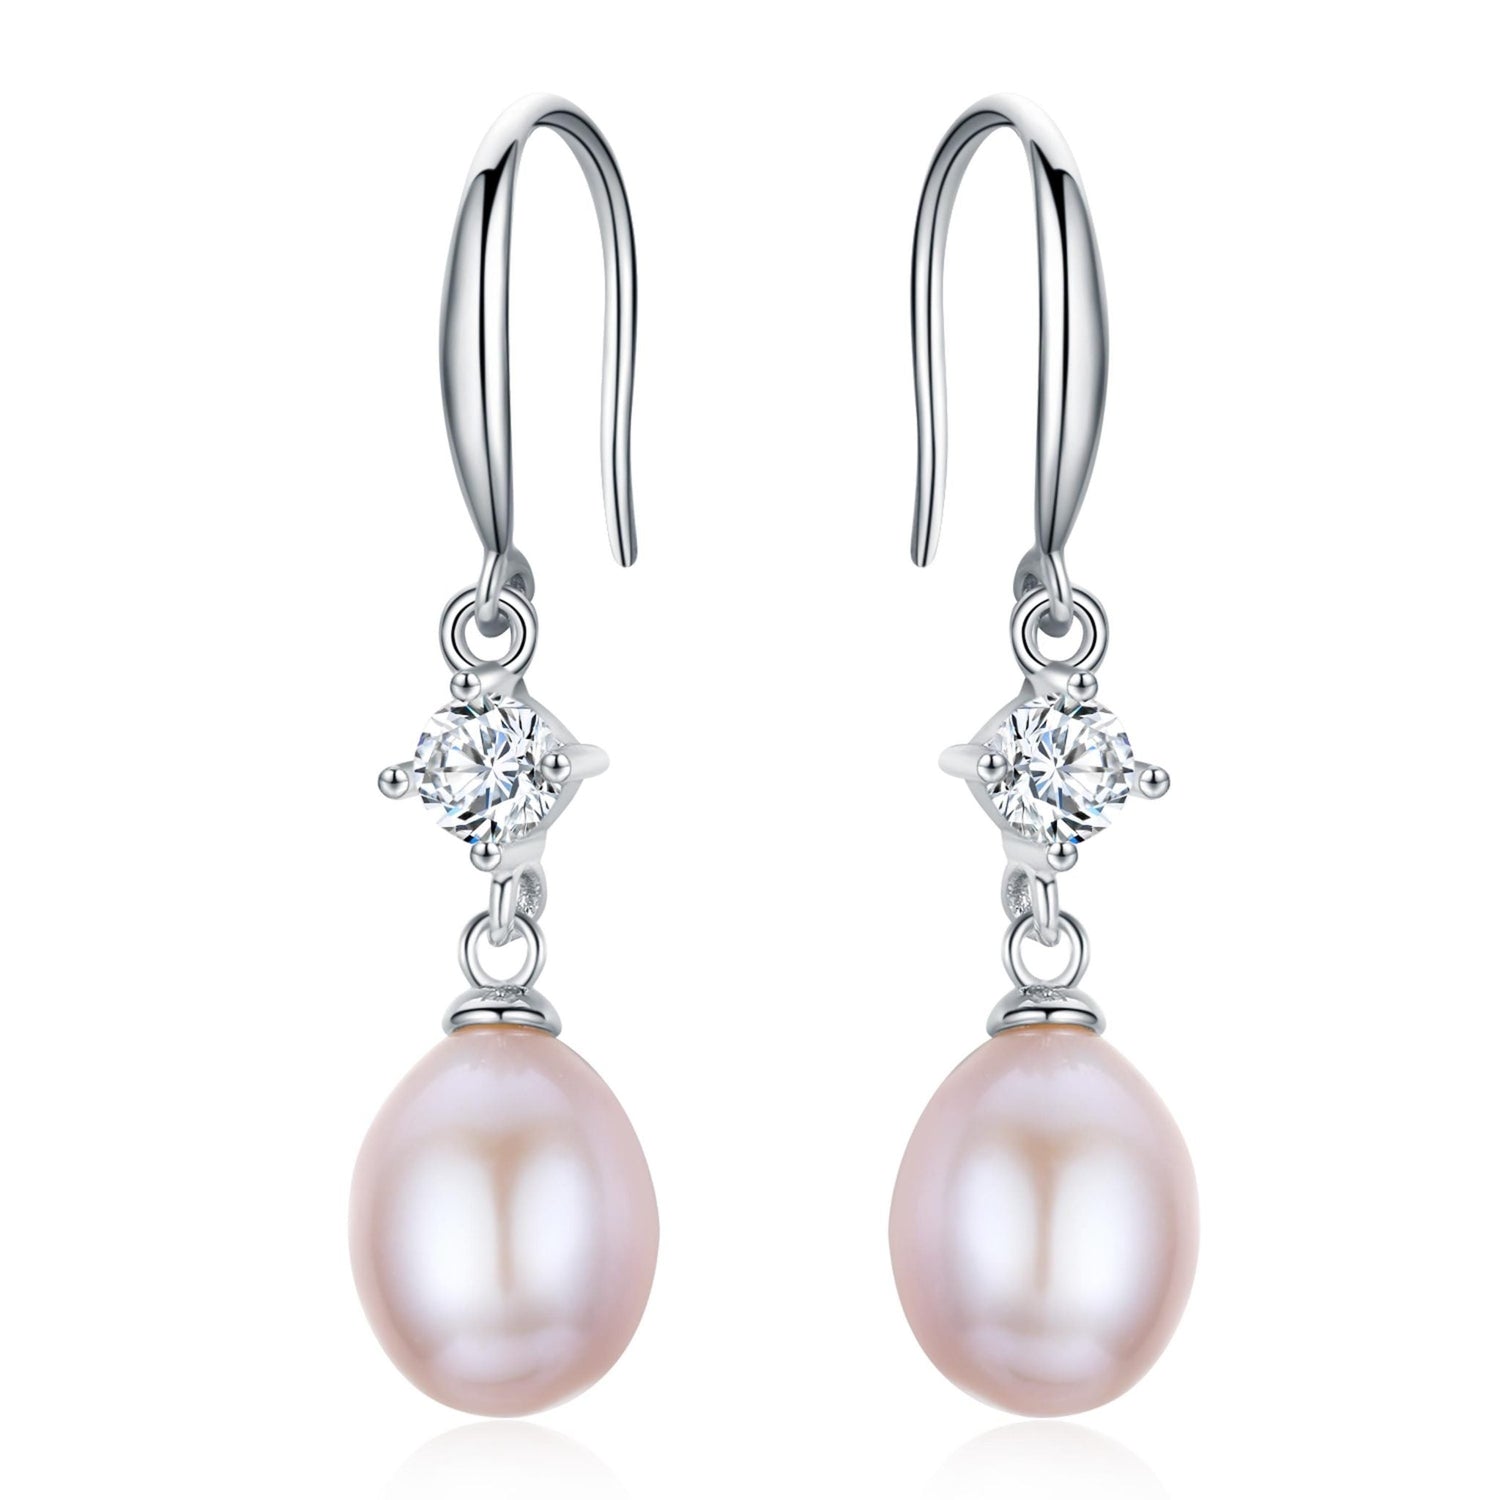 Passion Pink Earrings - Timeless Pearl